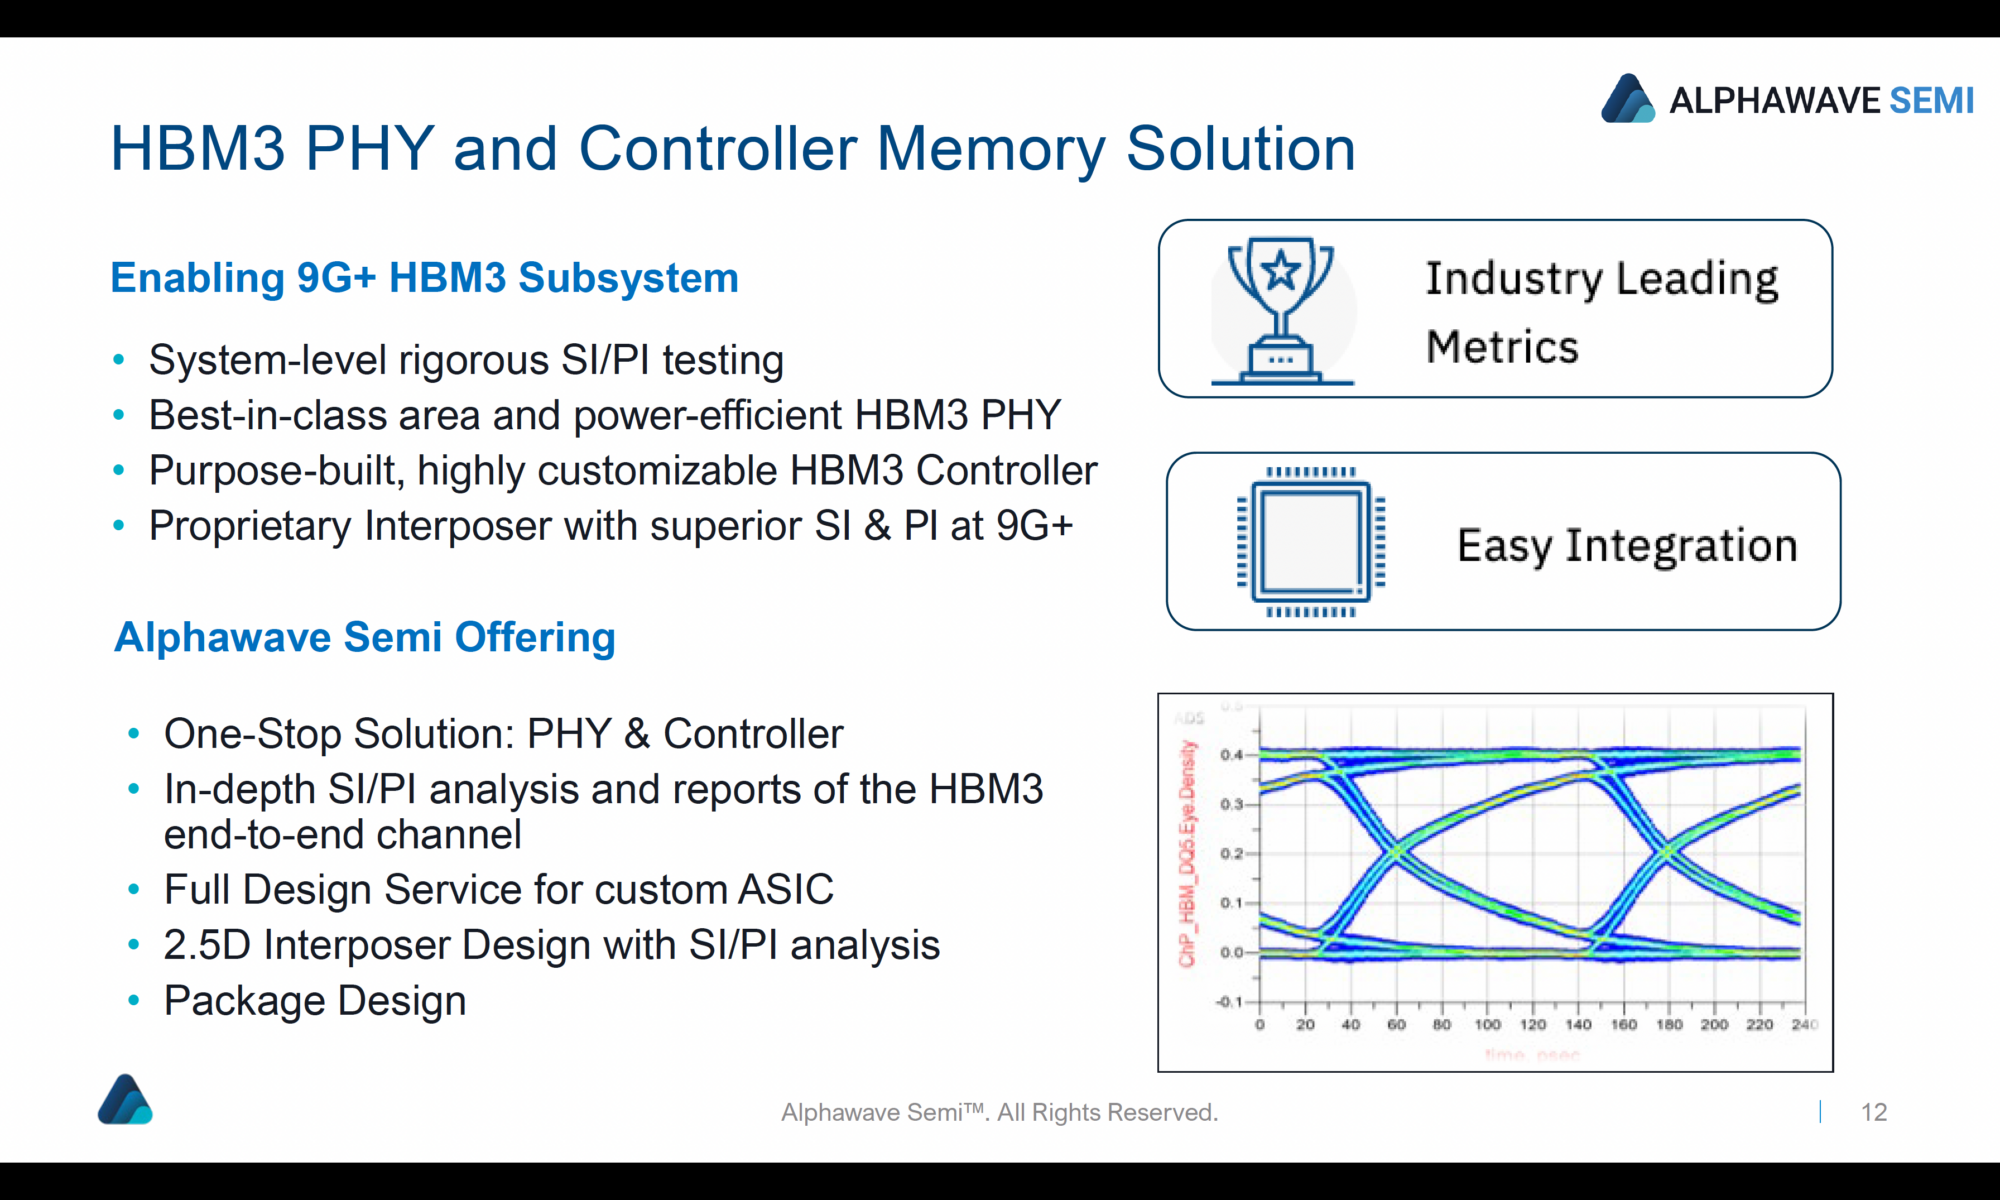 HBM3 PHY and Controller Memory Solution